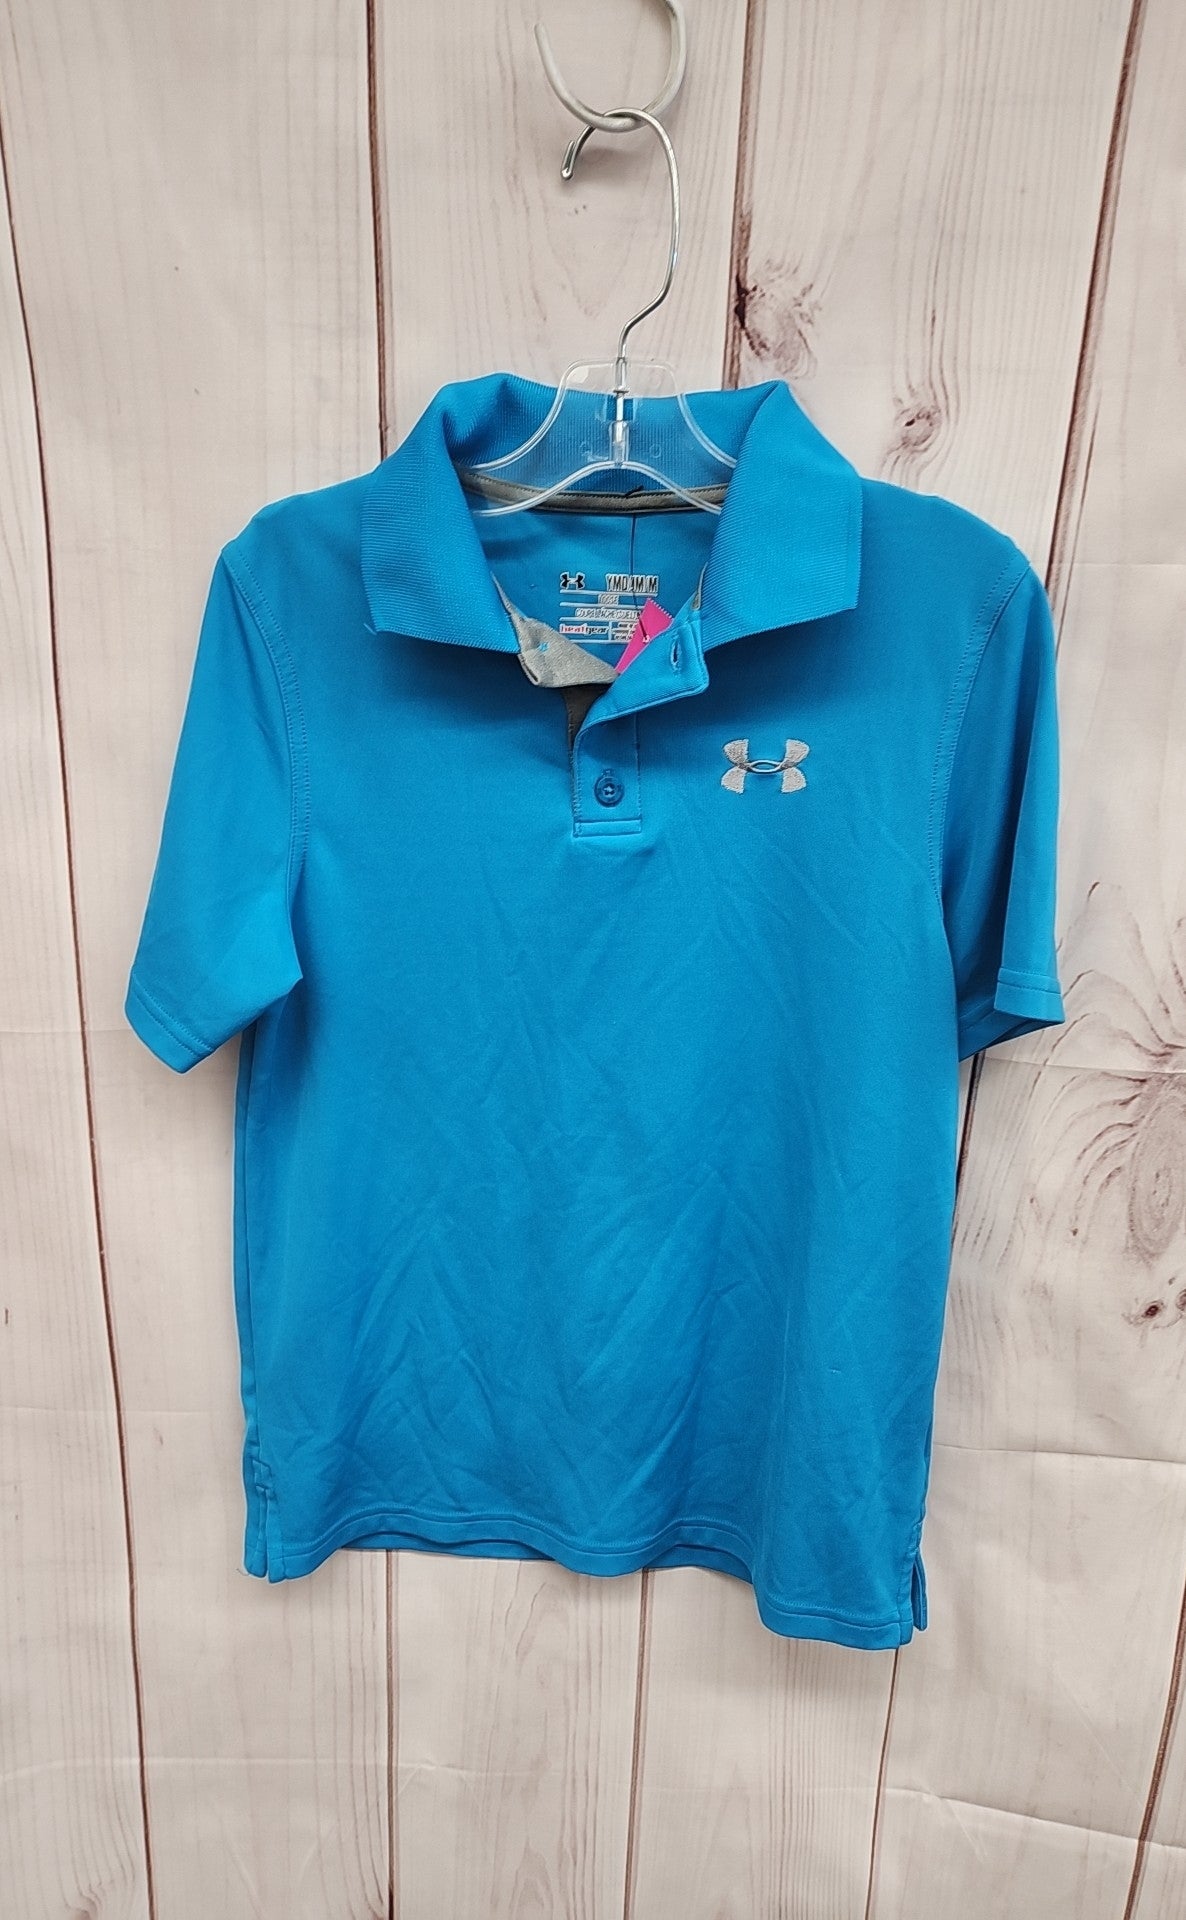 Under Armour Boy's Size 10/12 Turquoise Shirt